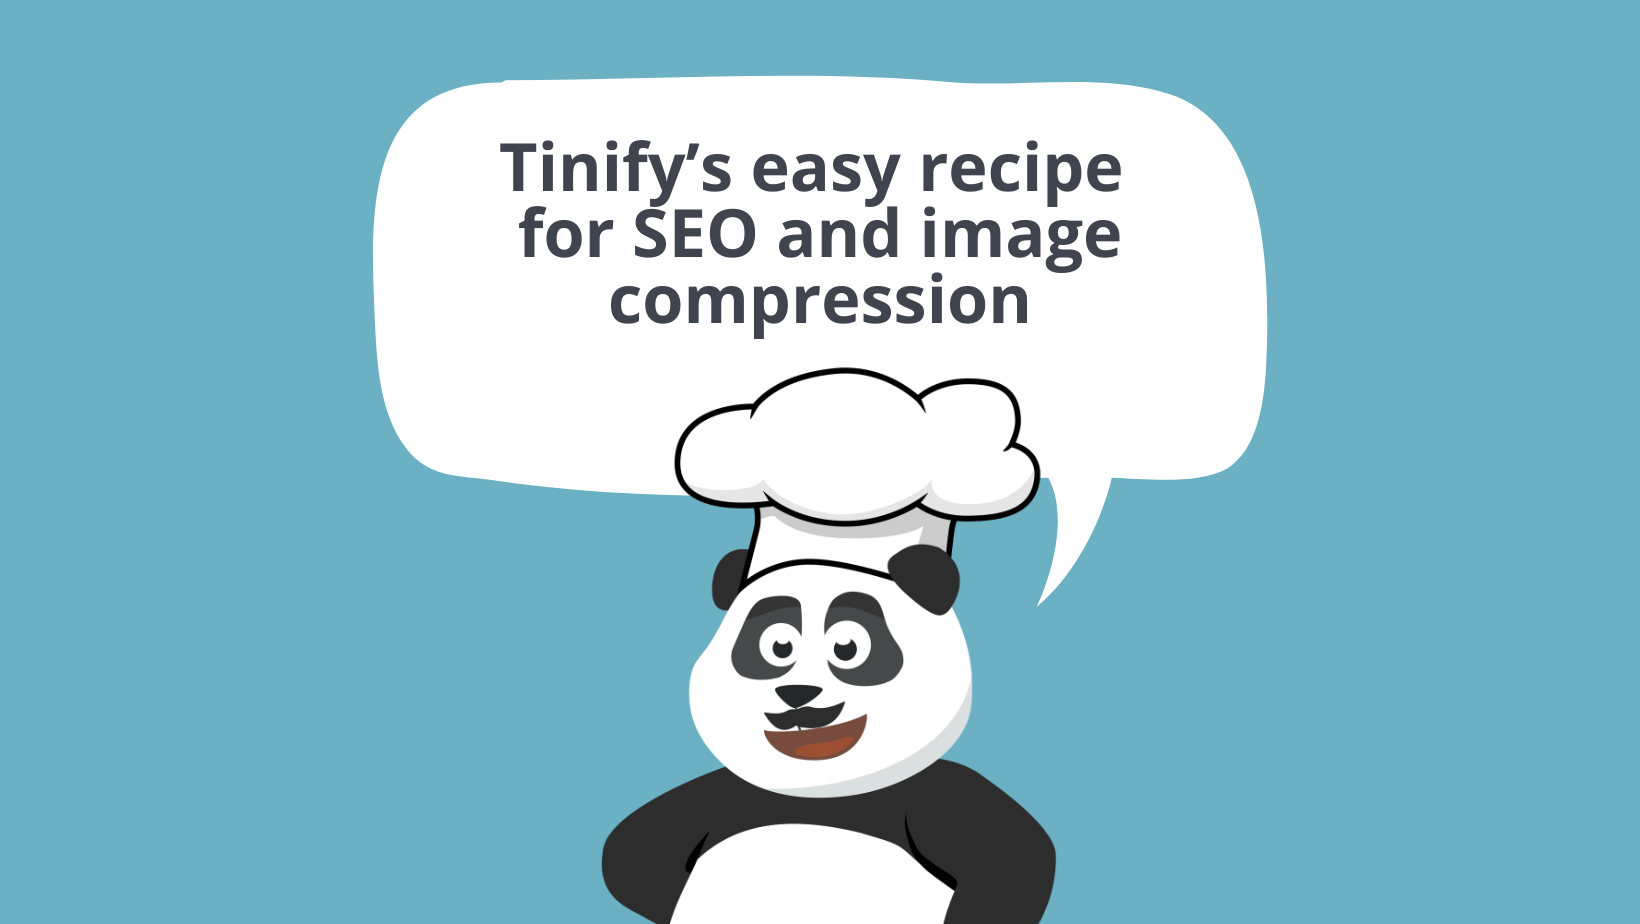 Tinify’s easy recipe for SEO basics and image compression